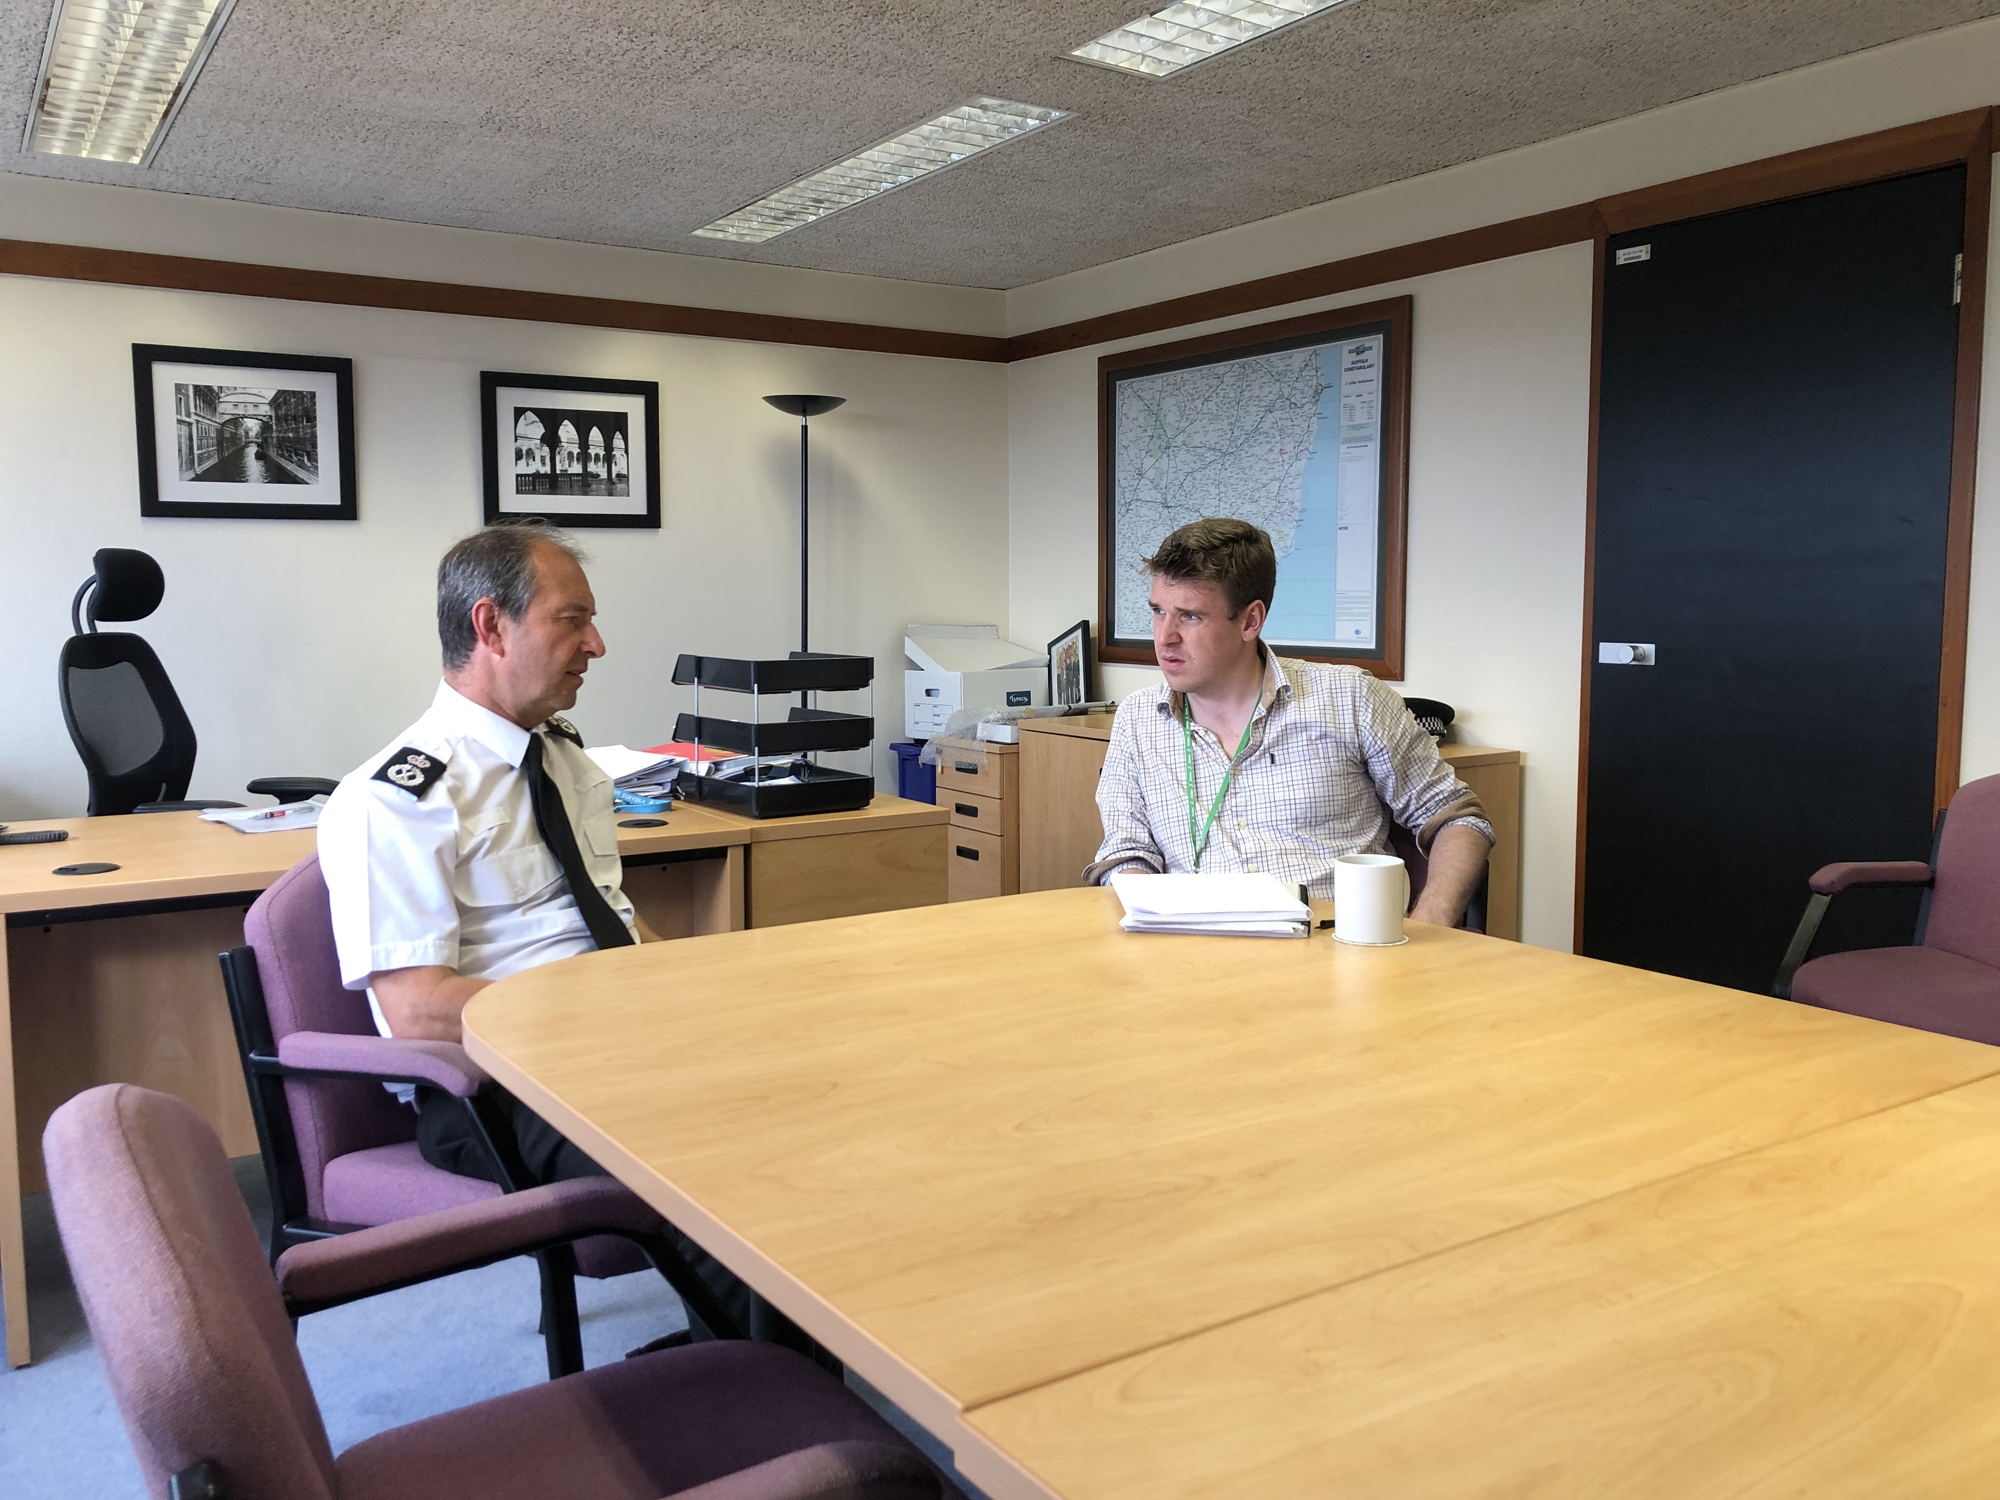 Since I was selected last autumn I have made tackling crime and anti-social a key priority of mine, says Tom Hunt. I have met with the Chief Constable, the Police and Crime Commissioner as well as a number of community groups across the Town.